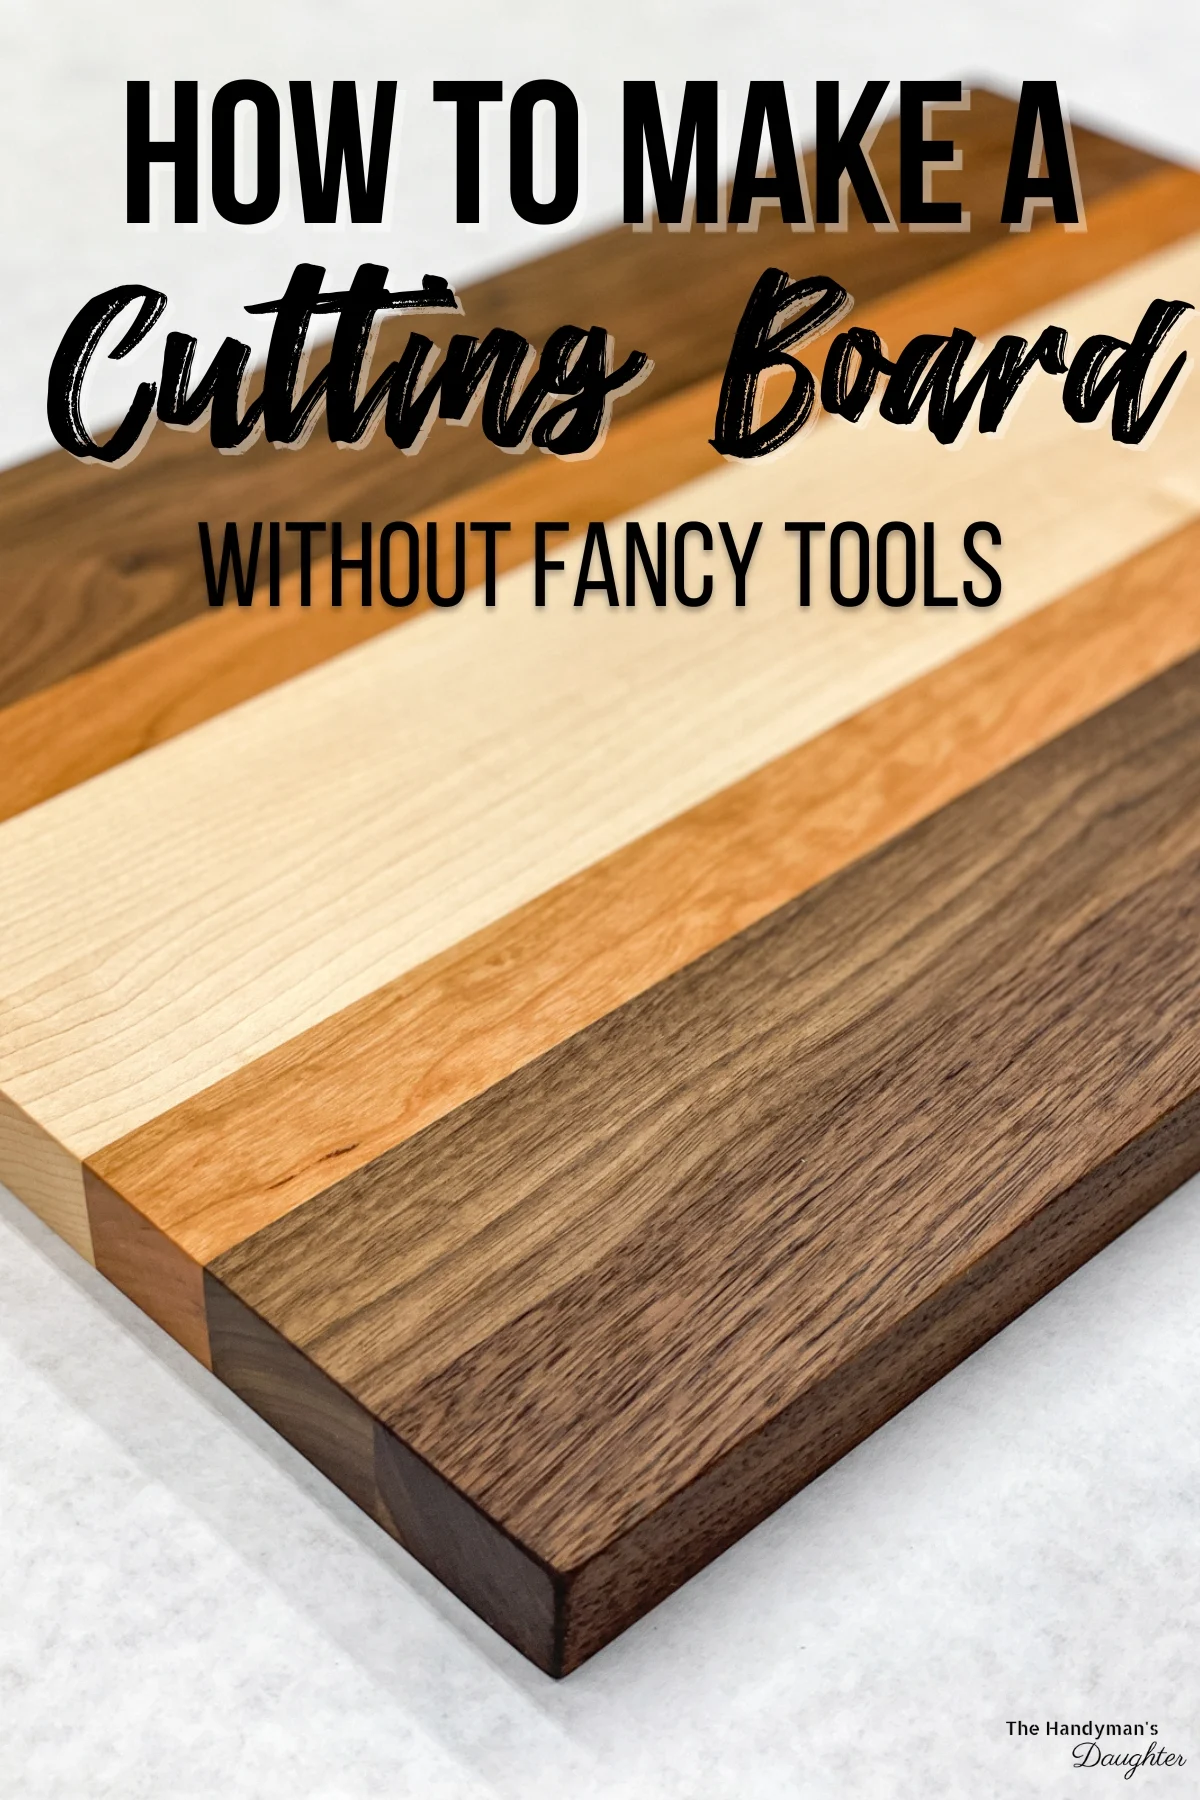 https://www.thehandymansdaughter.com/wp-content/uploads/2022/11/How-to-make-a-cutting-board-kit-Pin-1.jpeg.webp